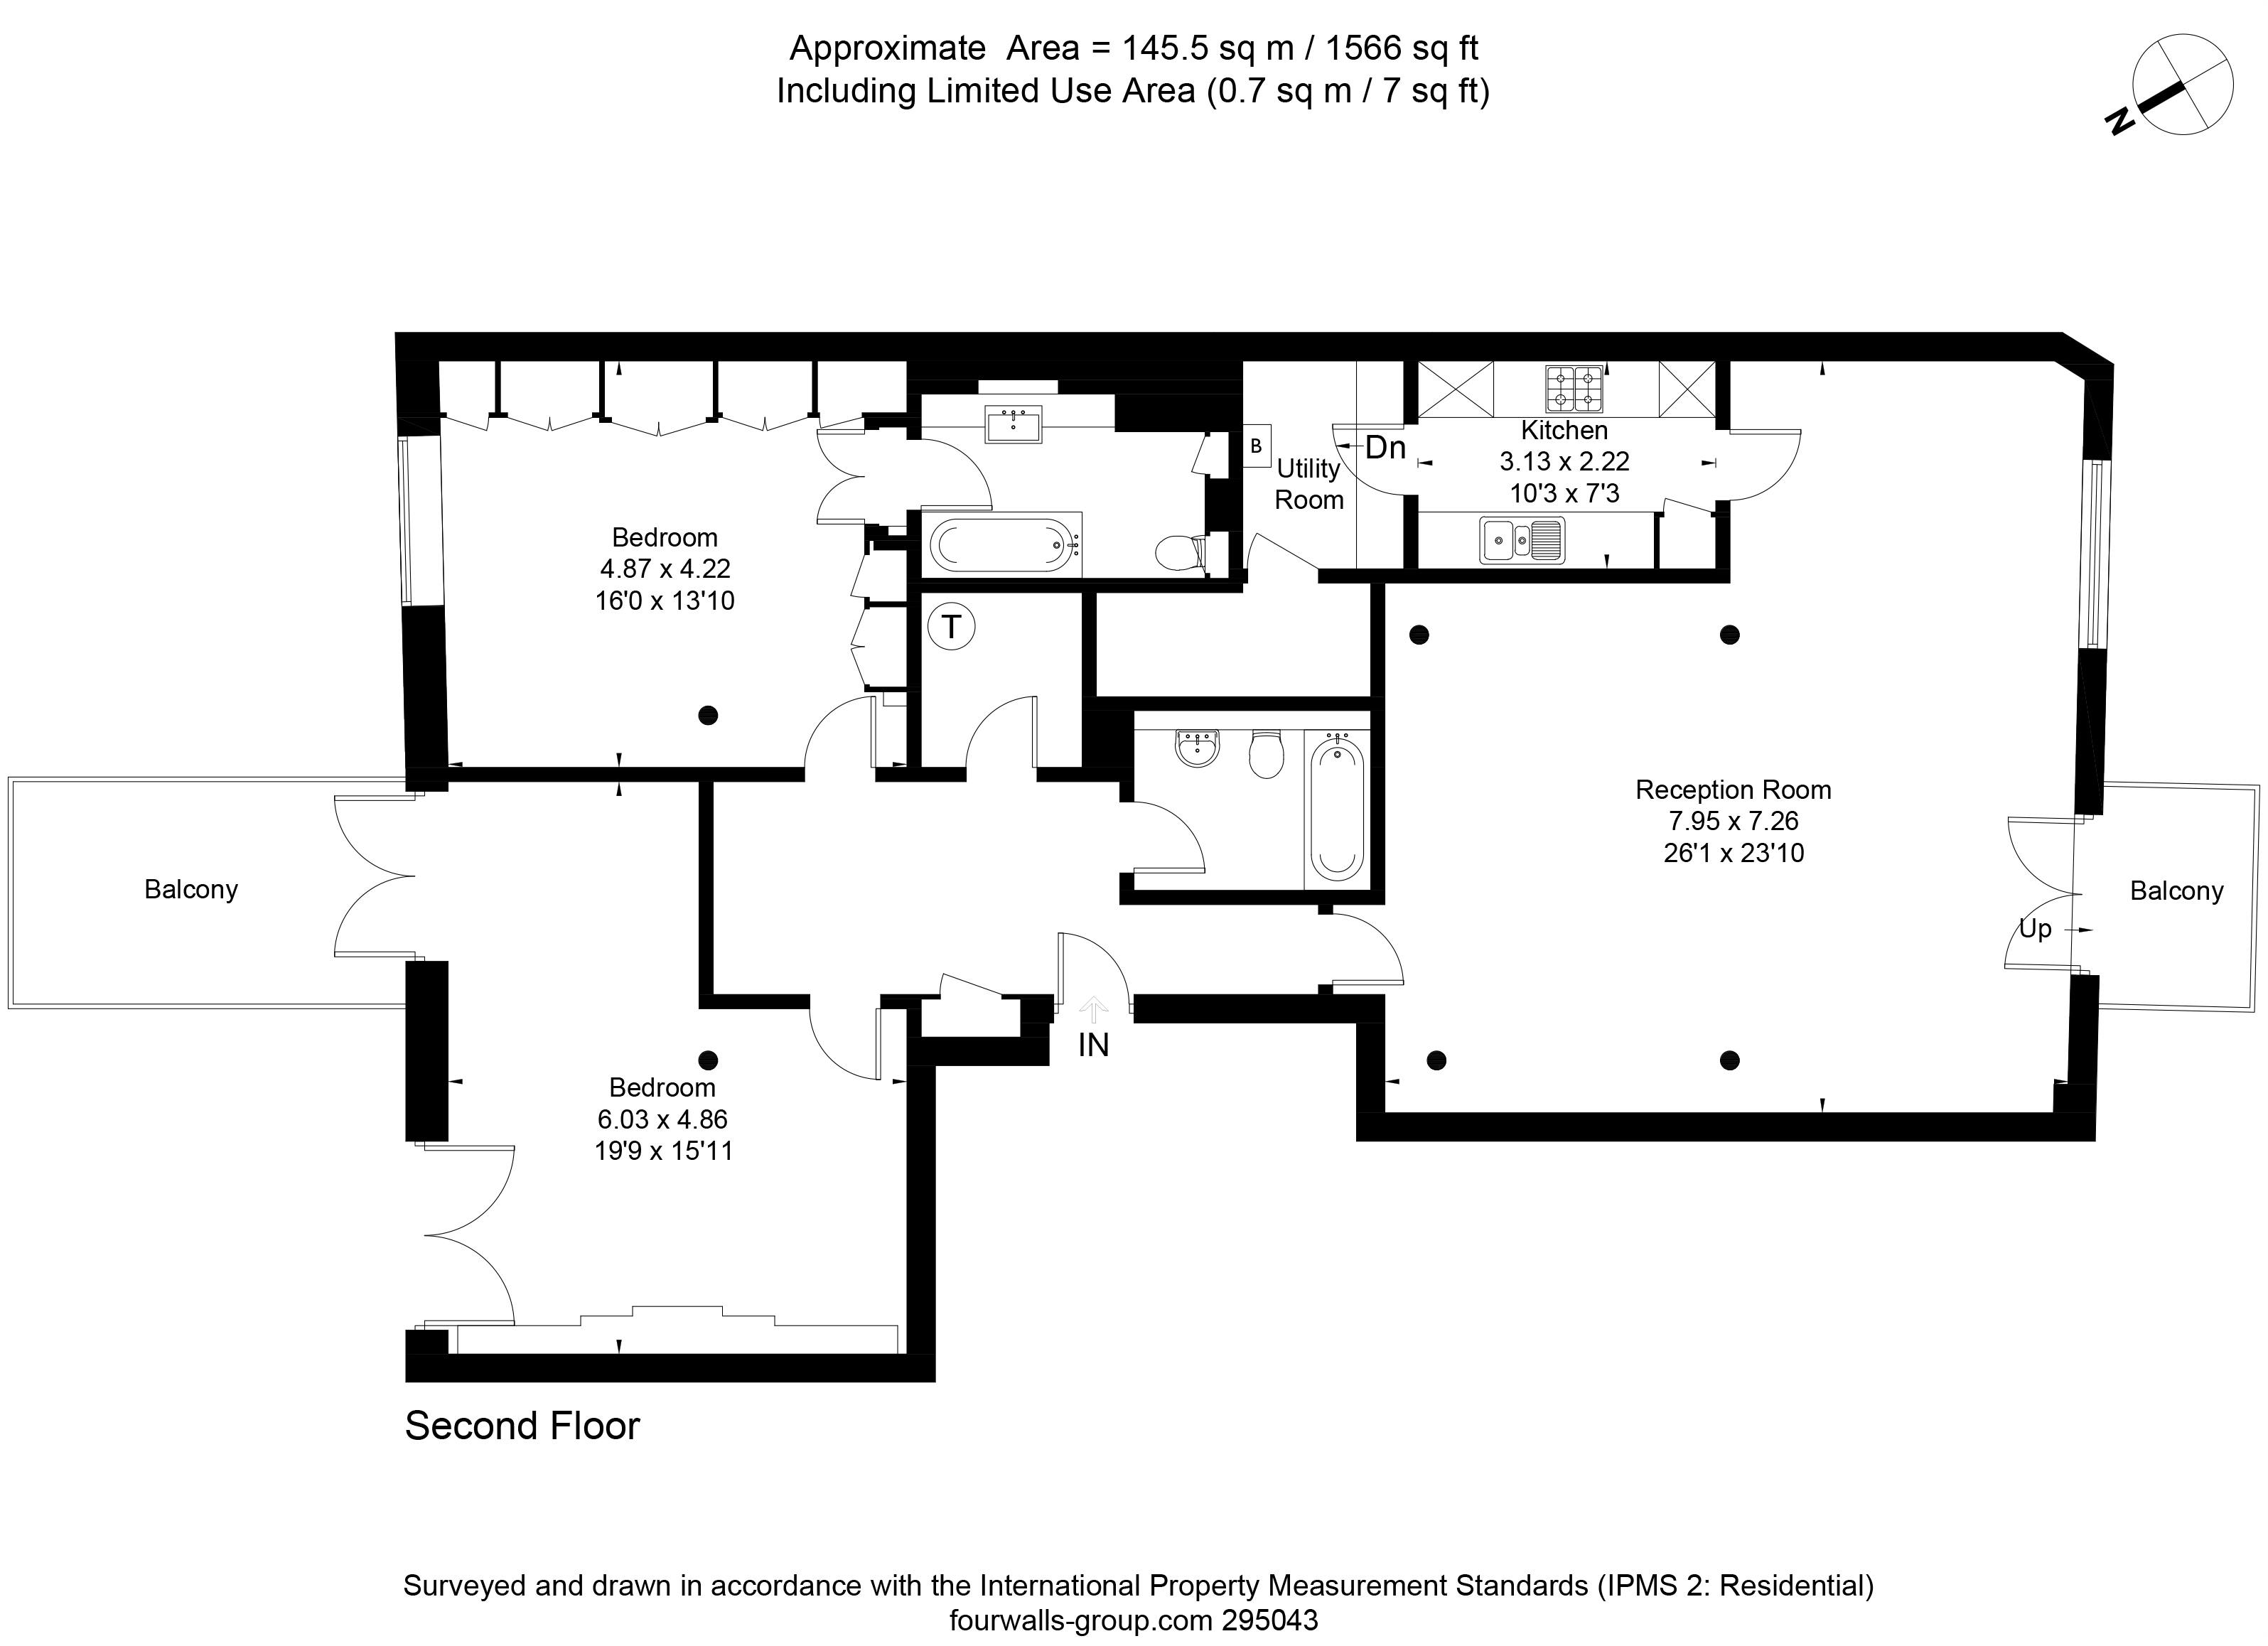 2 bed apartment for sale in Cardamom Building, 31 Shad Thames - Property Floorplan